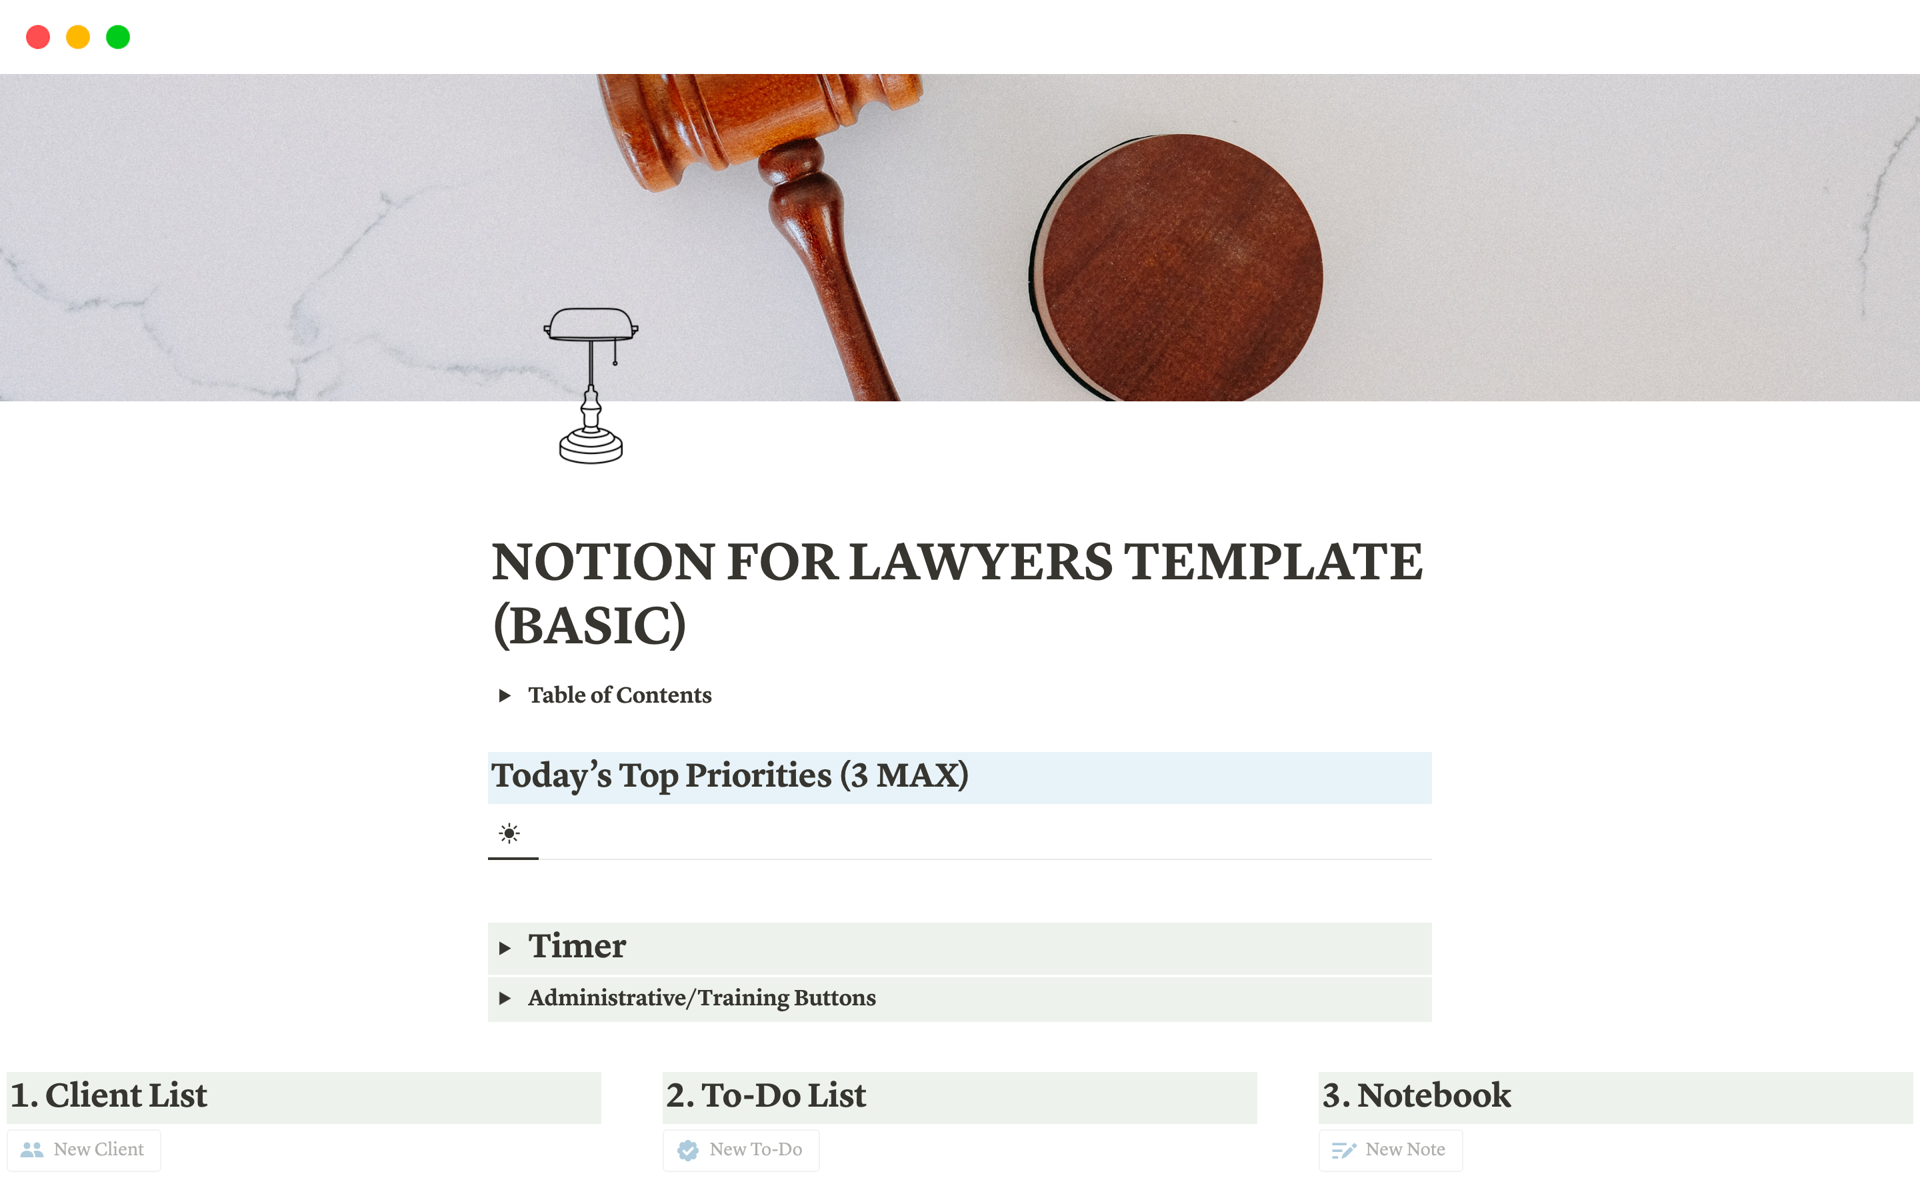 The Notion for Lawyers Template structures and organizes the 3 primary functions of the everyday lawyer: (1) To-Do Items; (2) Notetaking; and (3) Client Folders.